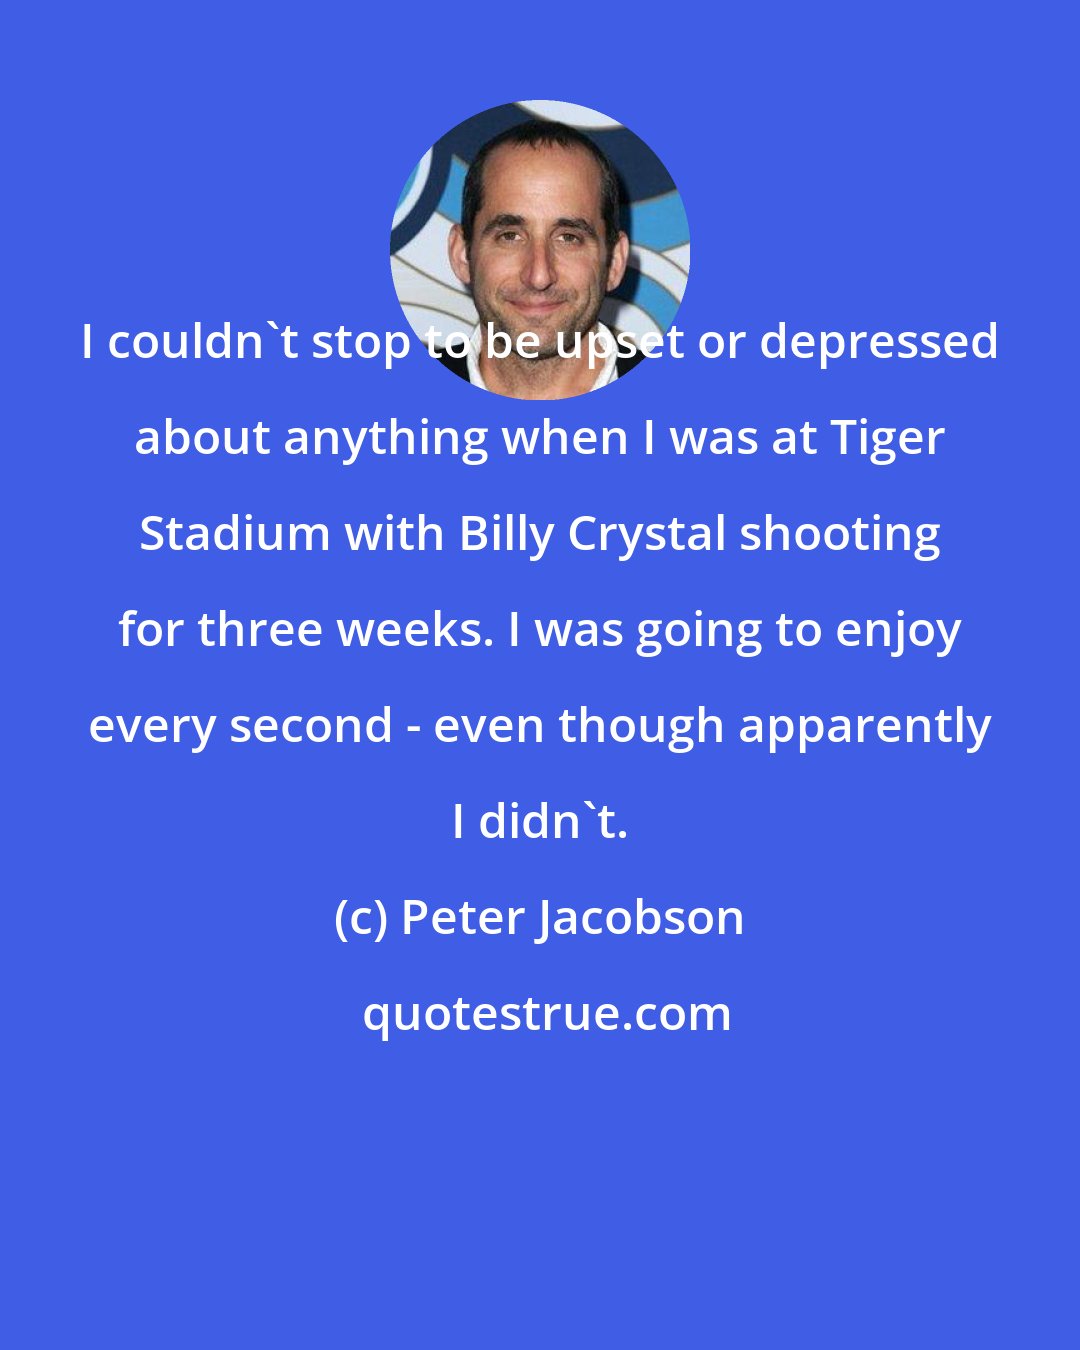 Peter Jacobson: I couldn't stop to be upset or depressed about anything when I was at Tiger Stadium with Billy Crystal shooting for three weeks. I was going to enjoy every second - even though apparently I didn't.